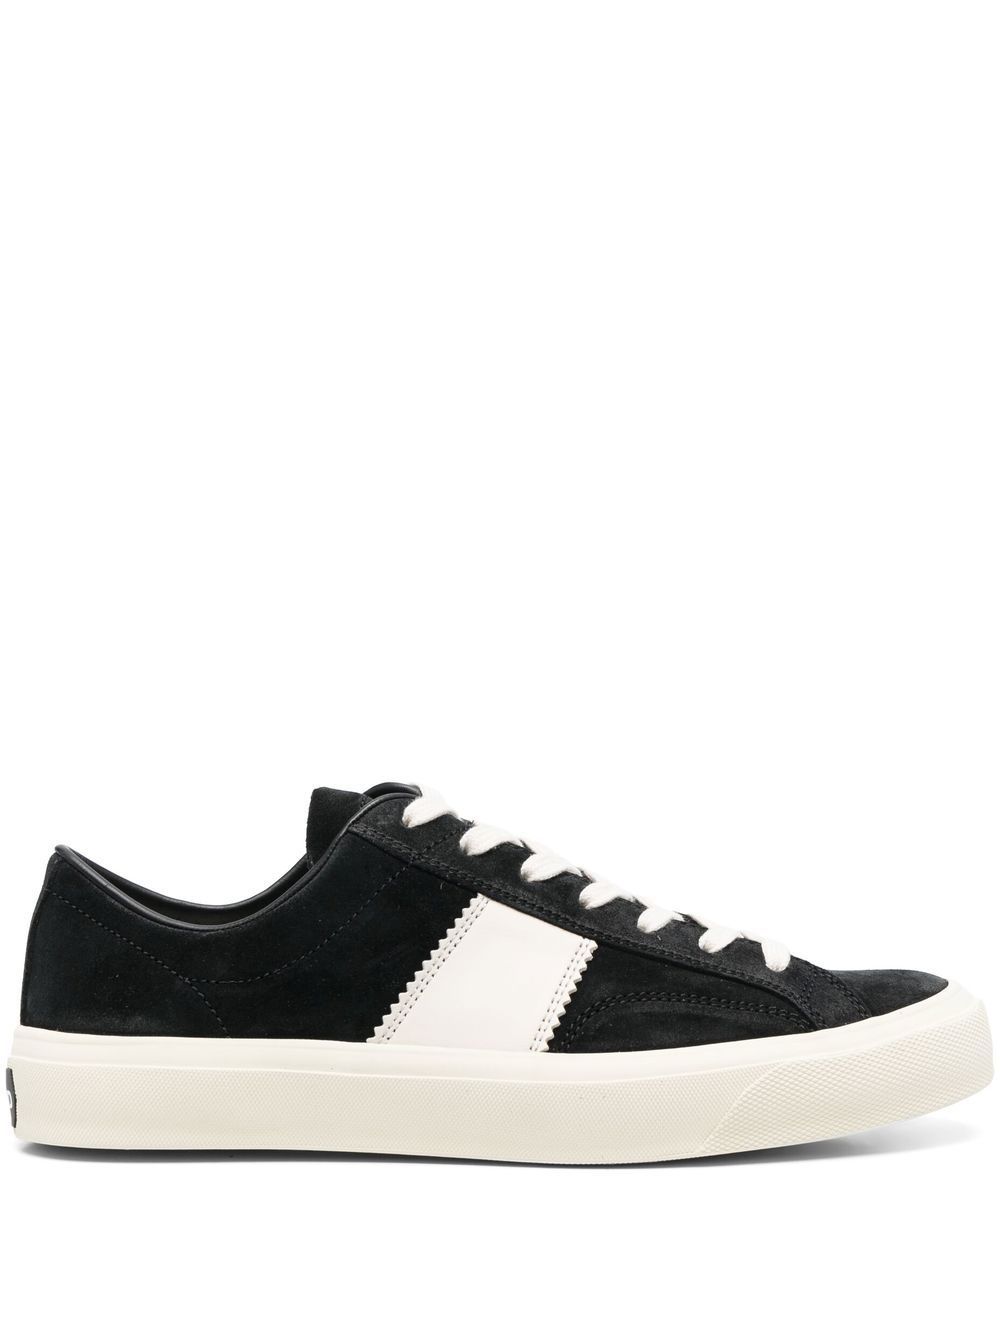 TOM FORD PANELLED LOW-TOP SNEAKERS